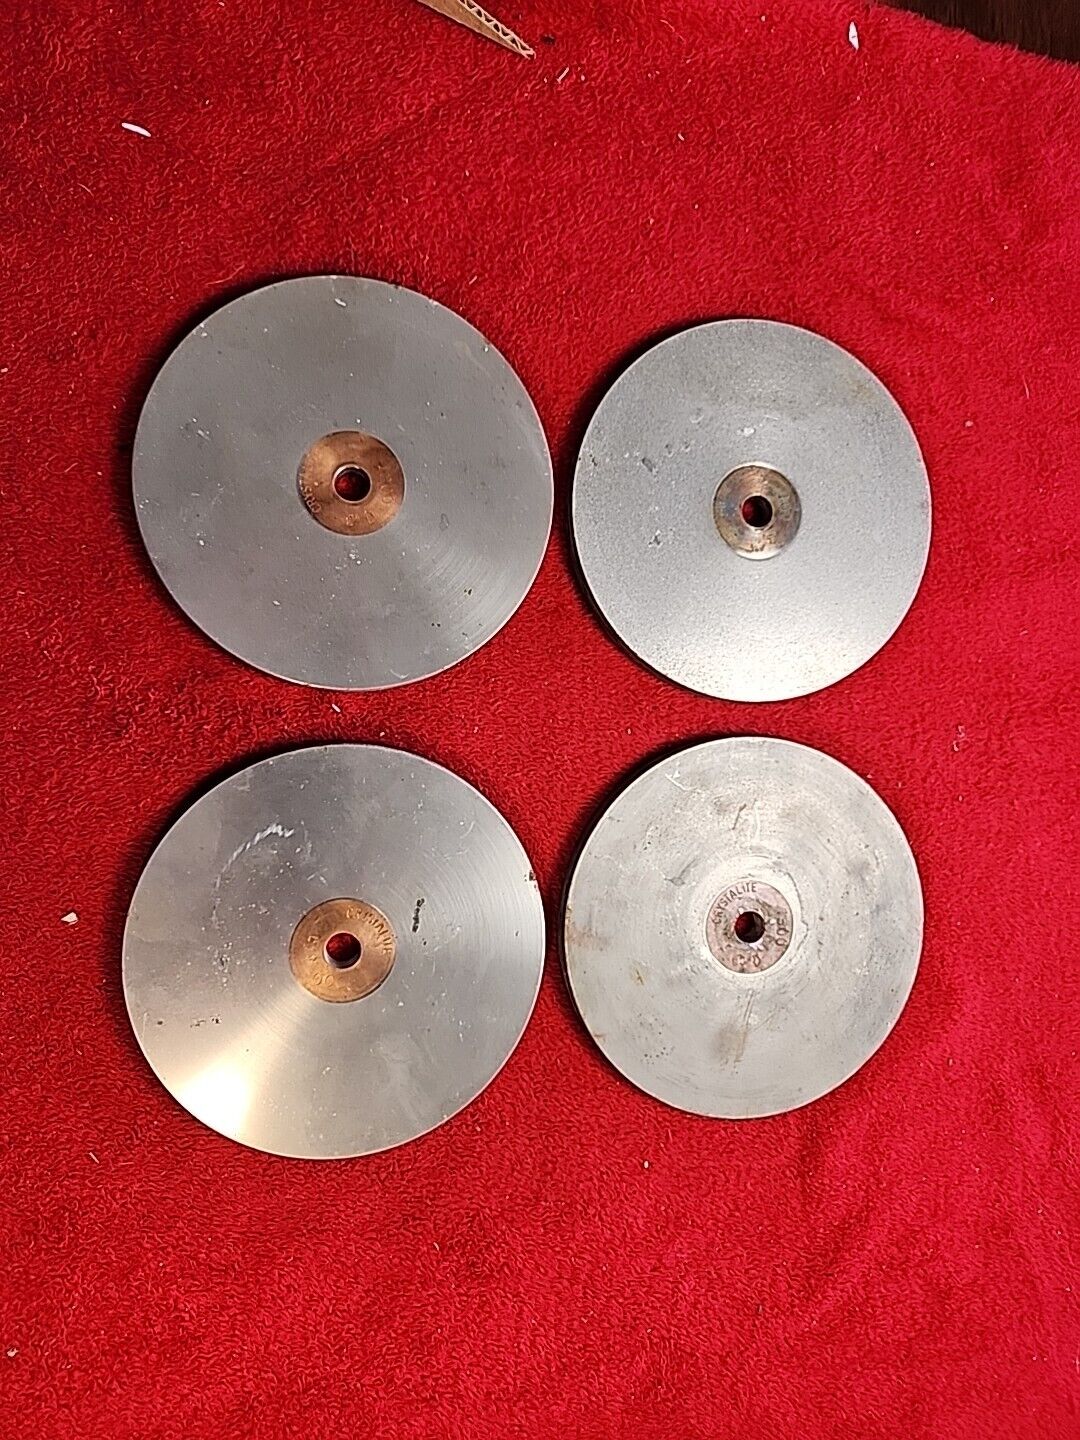 Set of Crystalite Diamond discs, 100, 1500, 1500, 3000 Used Commercial